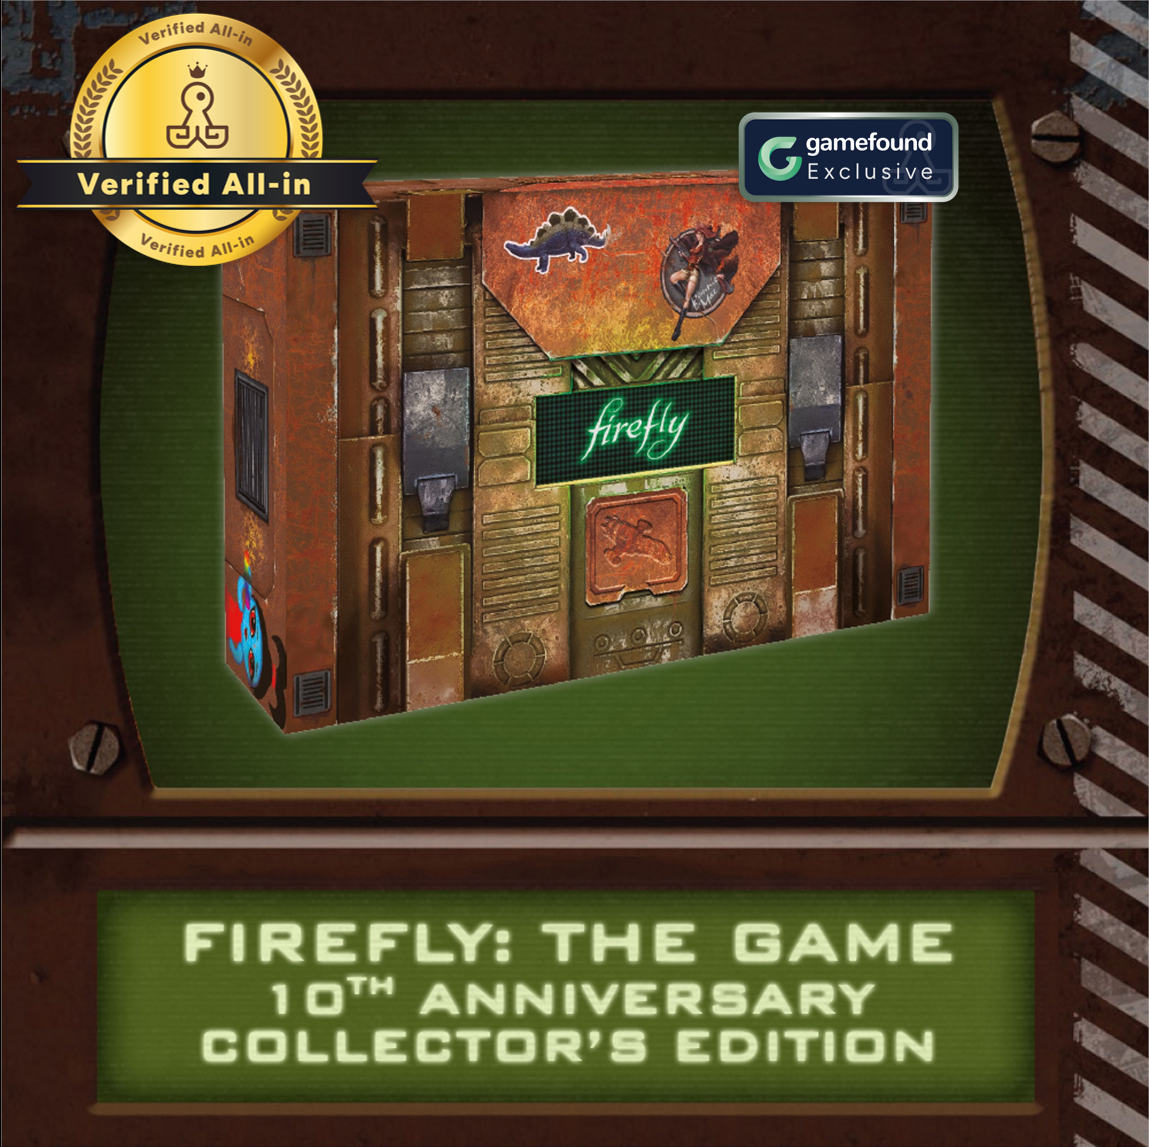 Gamefound Exclusive Firefly: The Board Game 10th Anniversary Collector's Edition Verified All-In